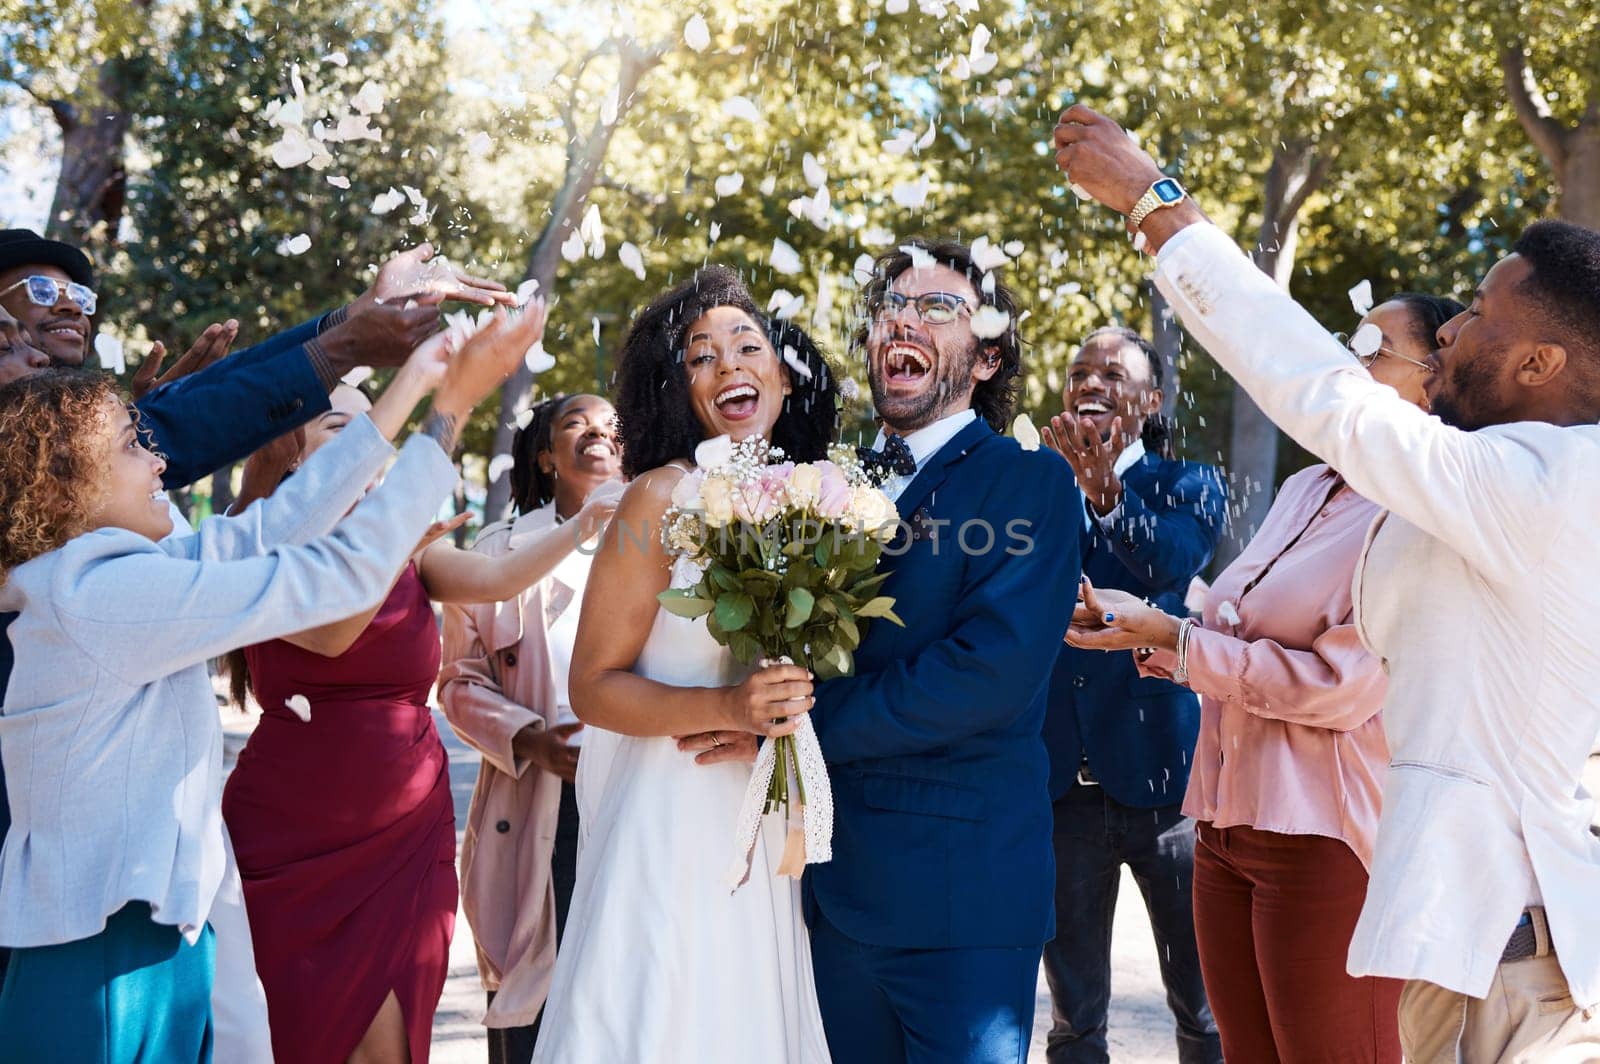 Wedding confetti, marriage couple and celebration of audience throwing flower petals outdoor. Happiness, excited and social event with bride and man laughing from love and congratulations applause by YuriArcurs